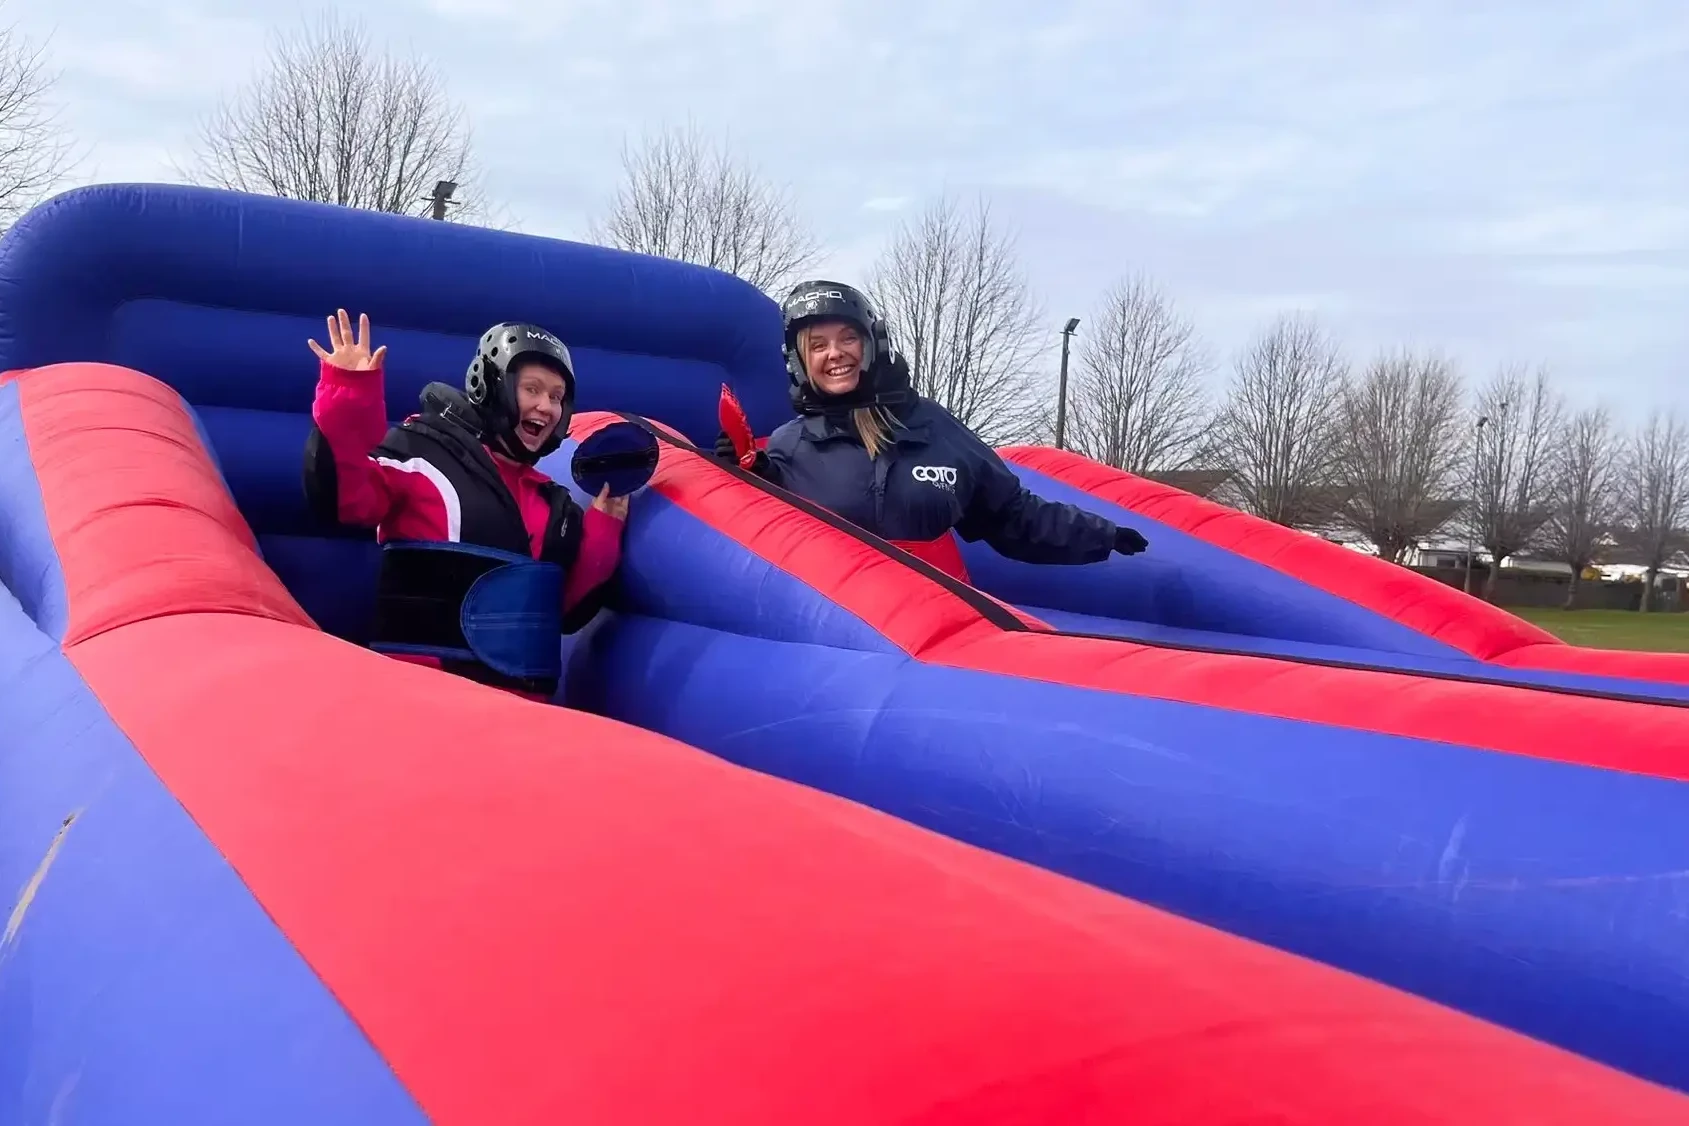 people having fun on slippery slides in outdoor team building event